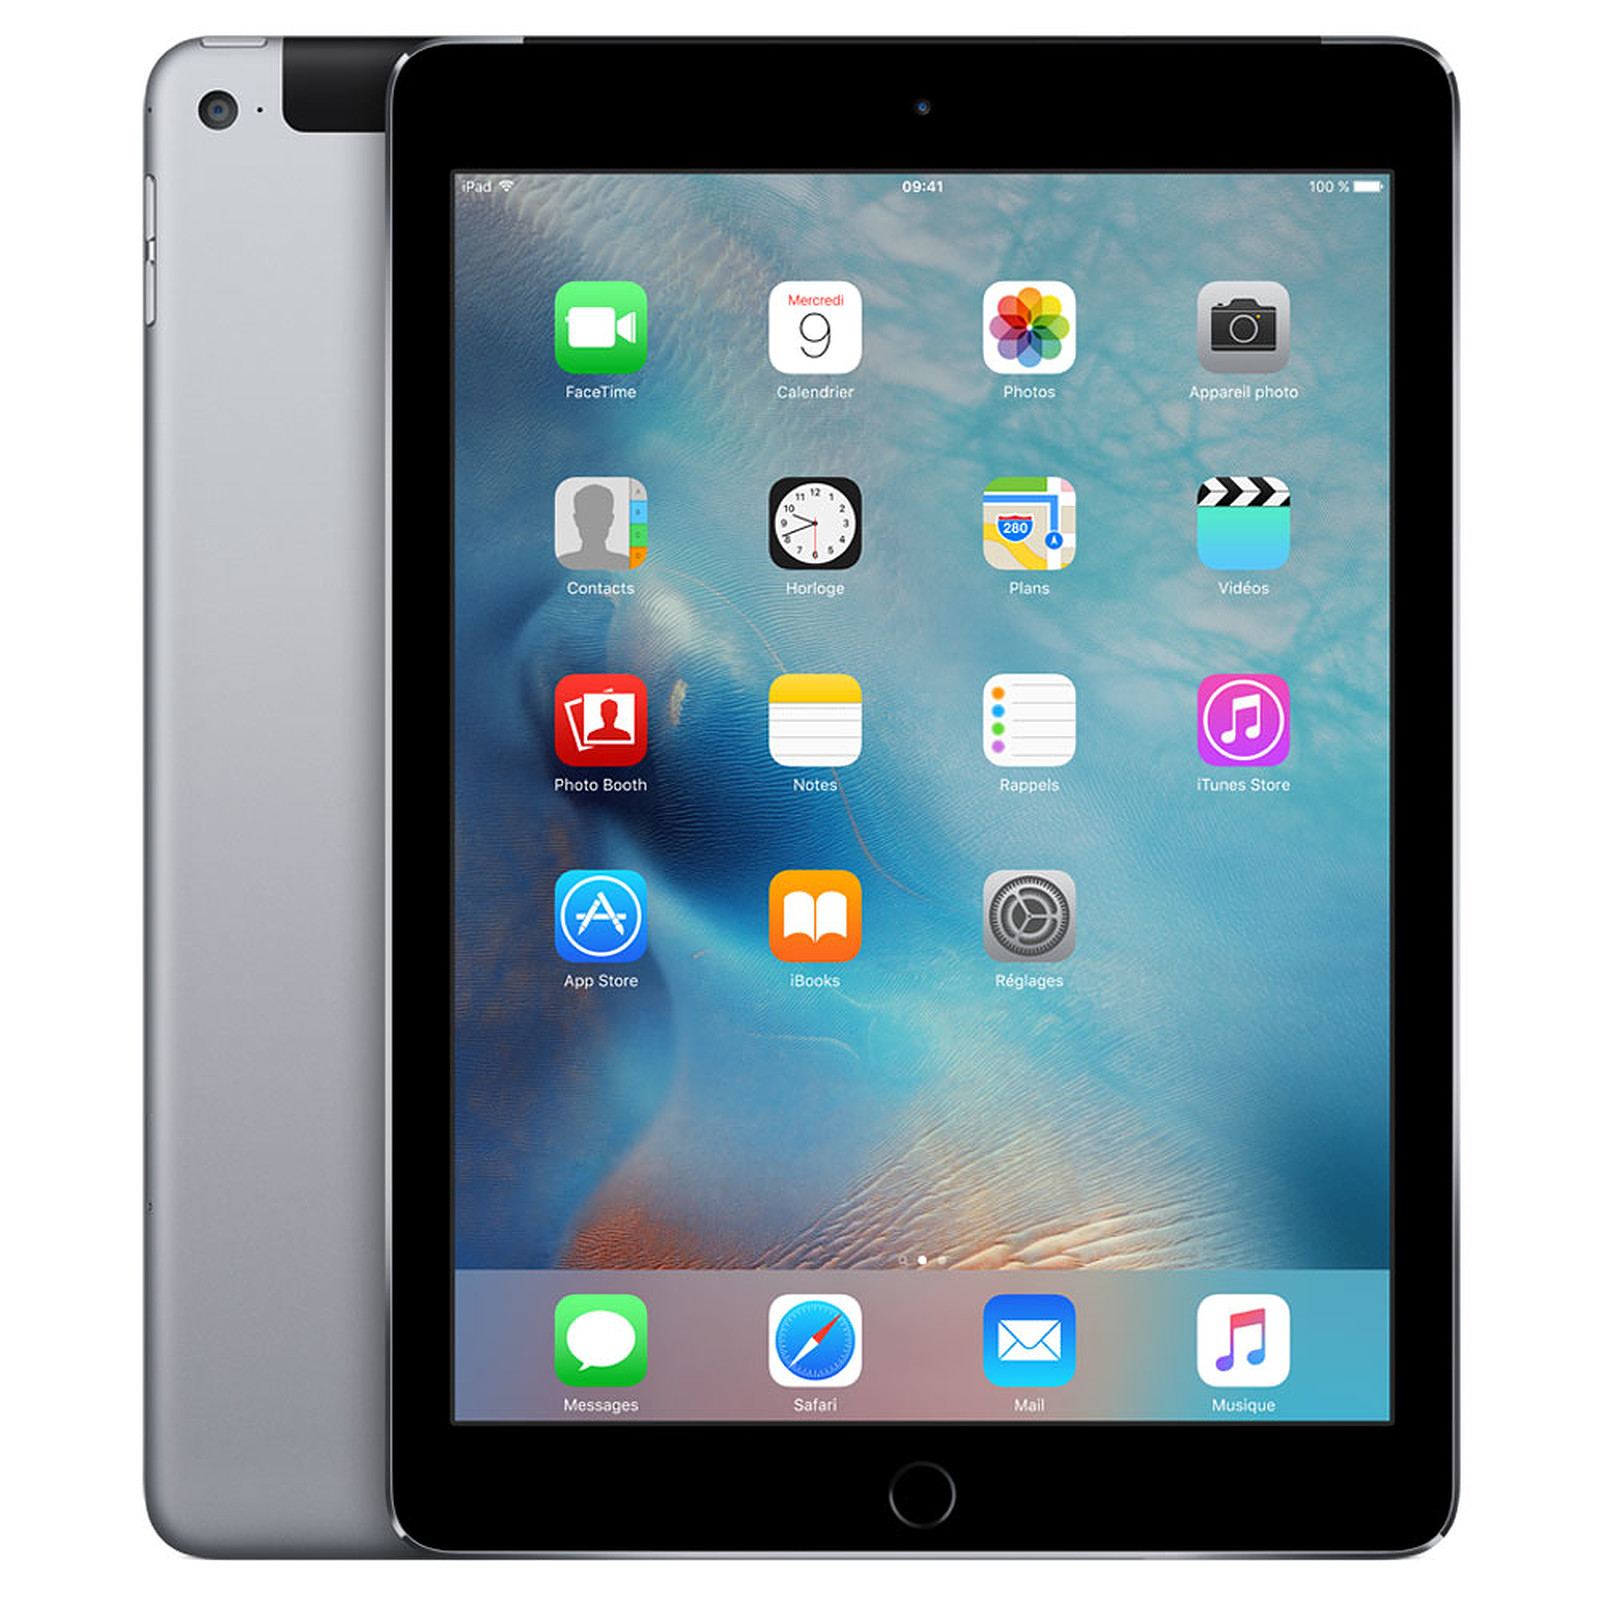 Apple iPad Air 2 16 Go Wi-Fi + Cellular Gris sideral · Reconditionne - Tablette tactile Apple